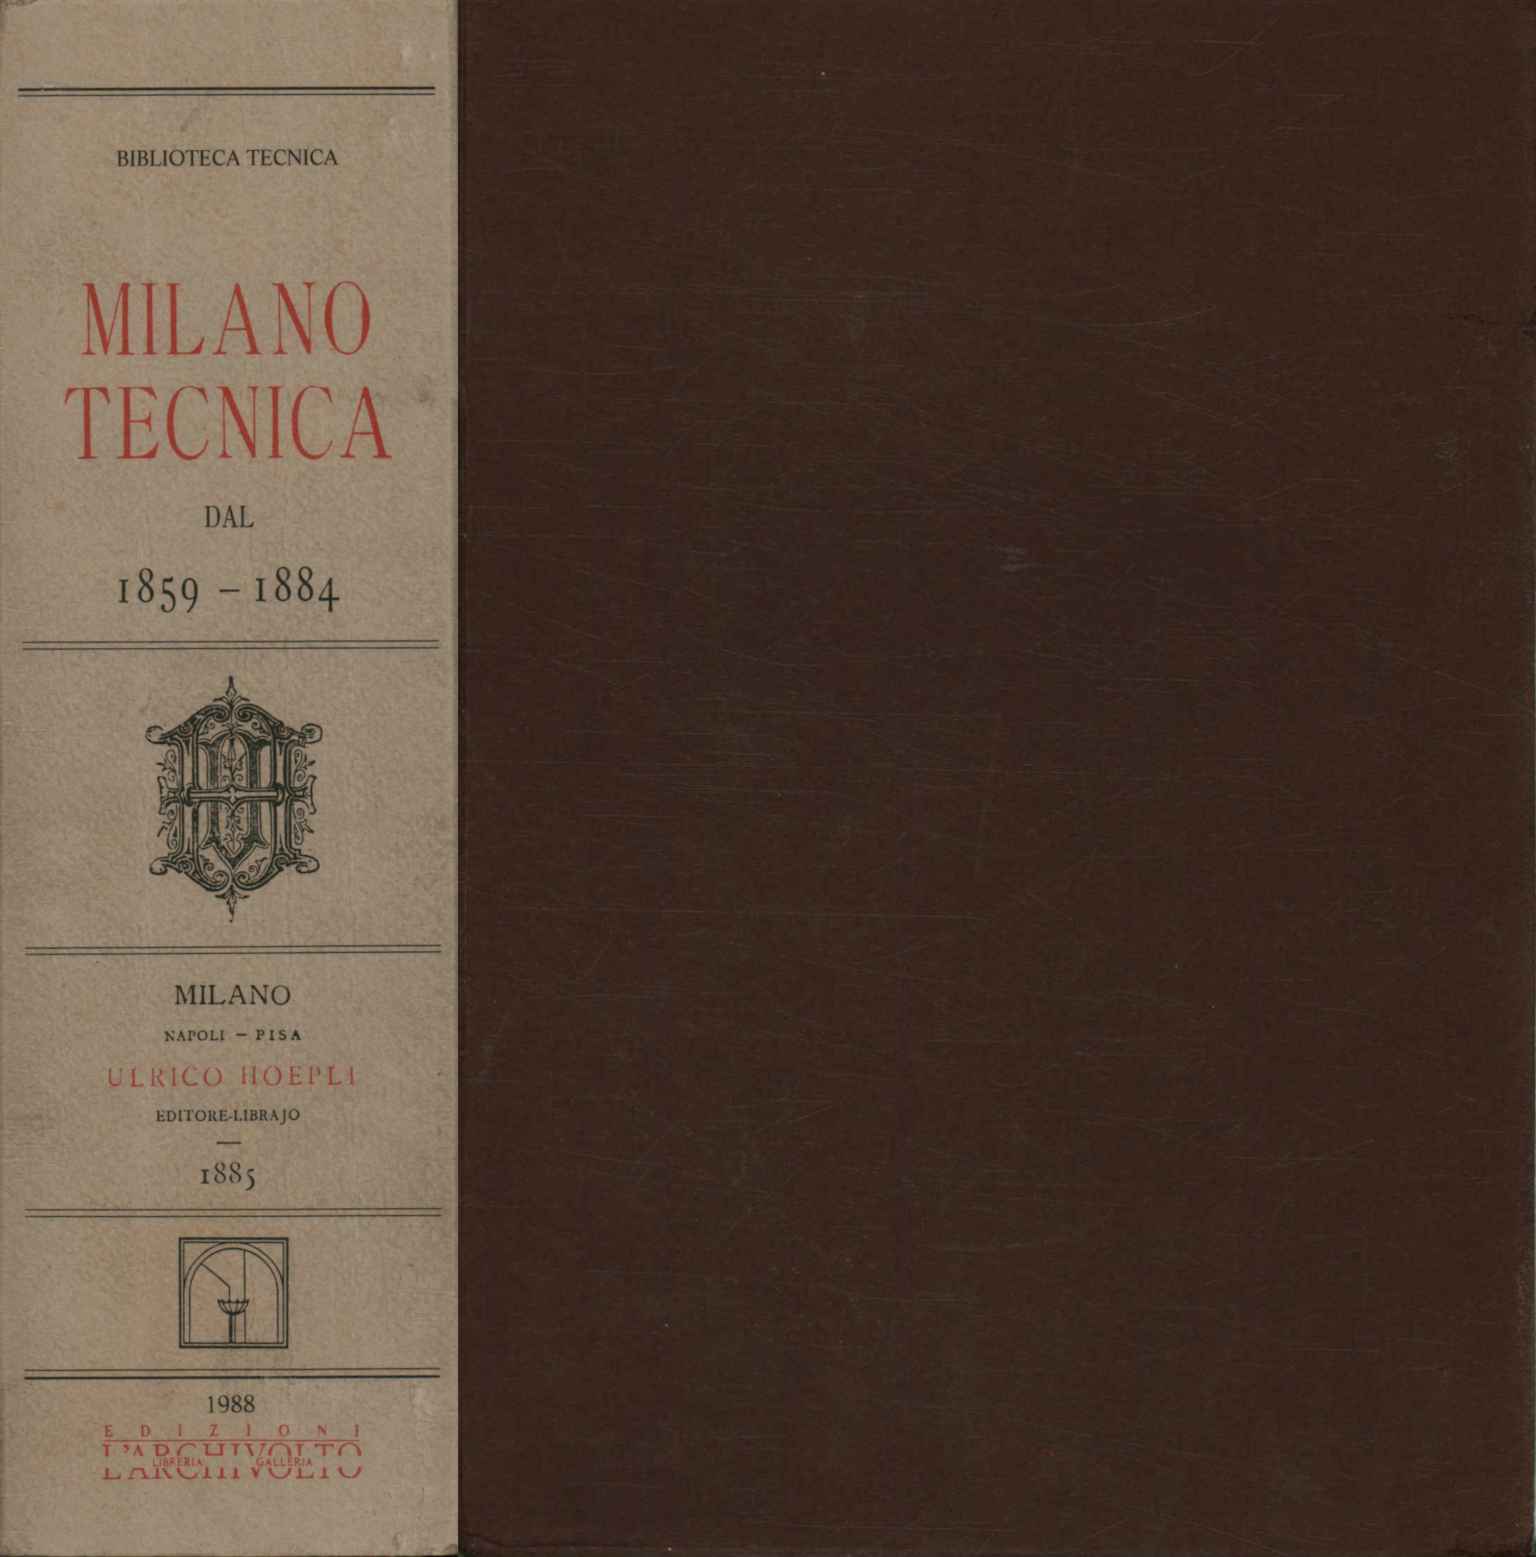 Technical Milan from 1859 to 1884